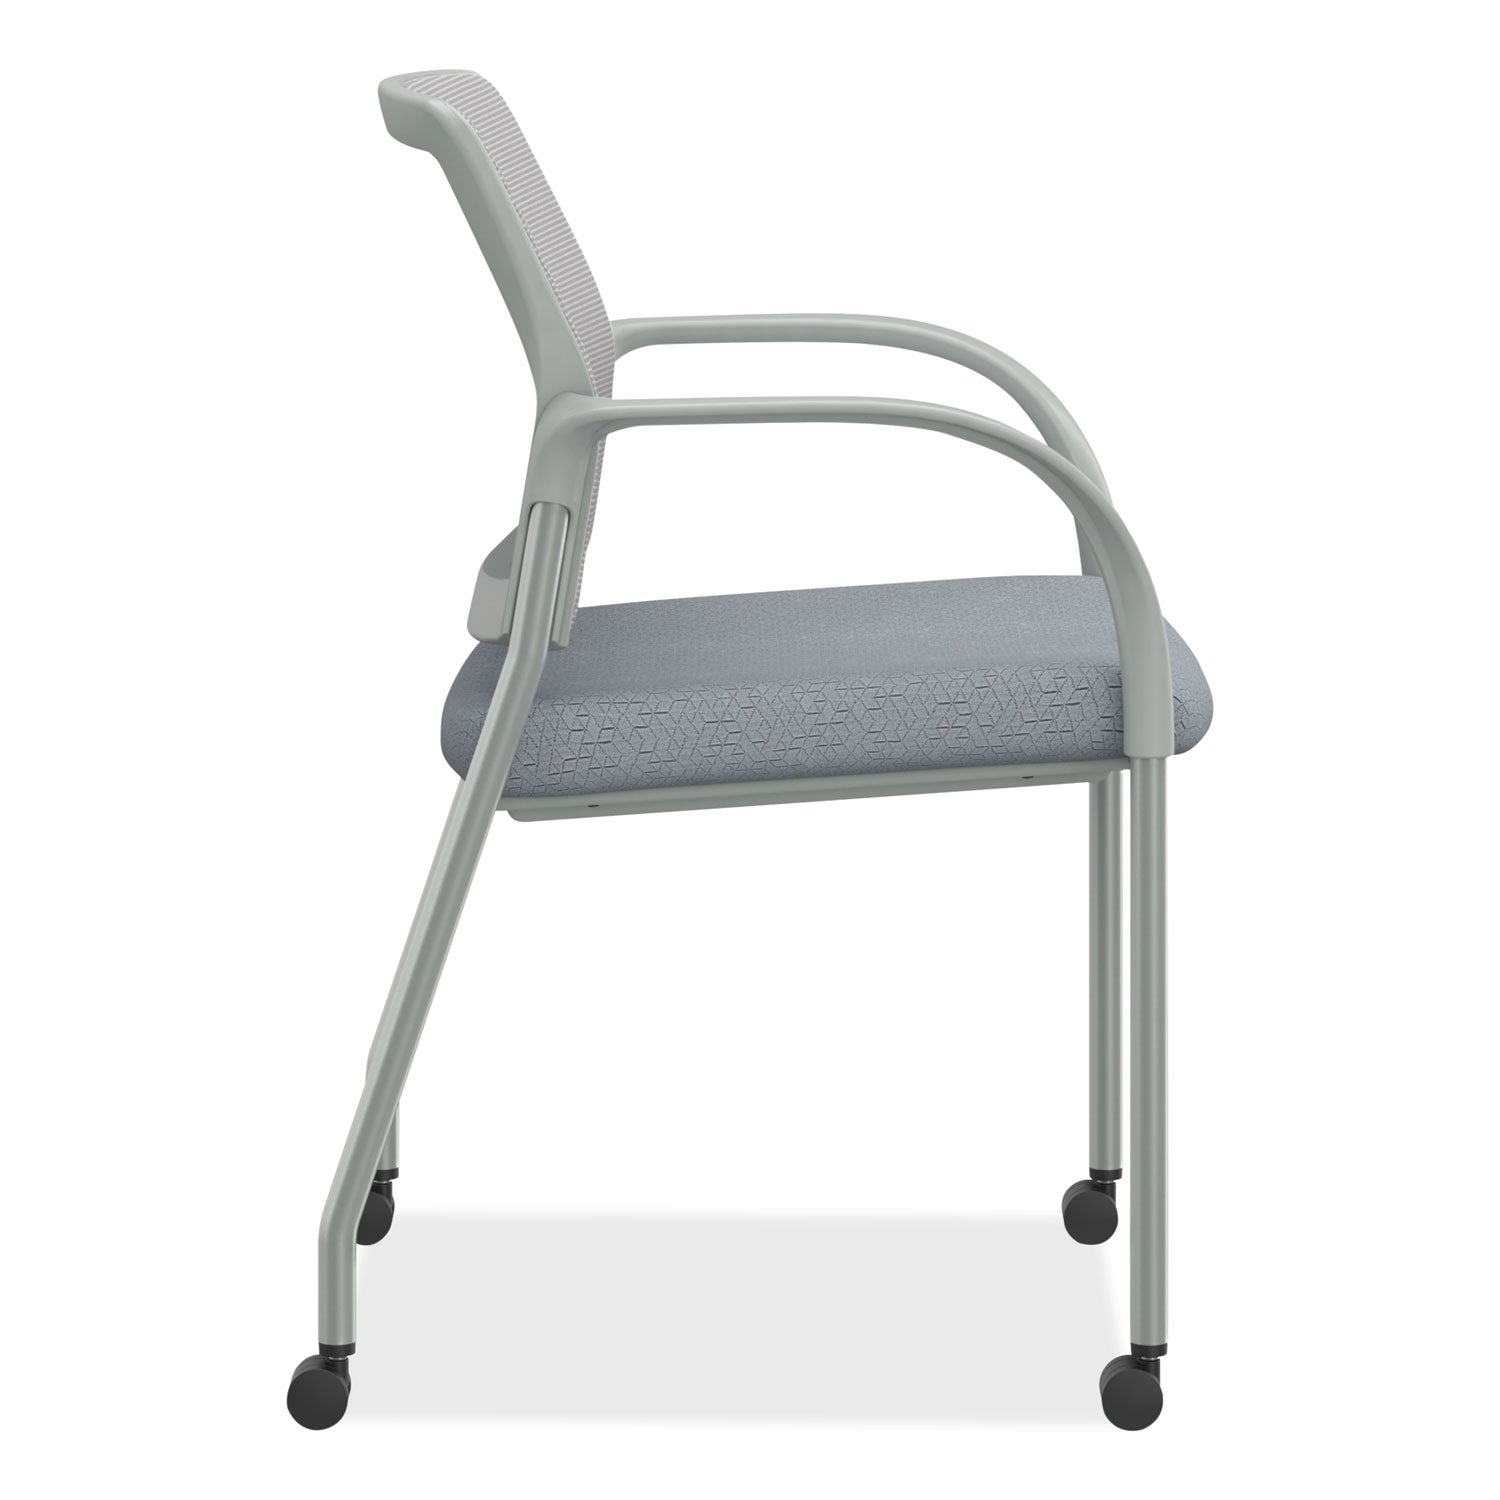 ignition-series-mesh-back-mobile-stacking-chair-25-x-2175-x-335-basalt-fog-textured-silver-base-ships-in-7-10-bus-days_honi2s6fhfa258t - 3